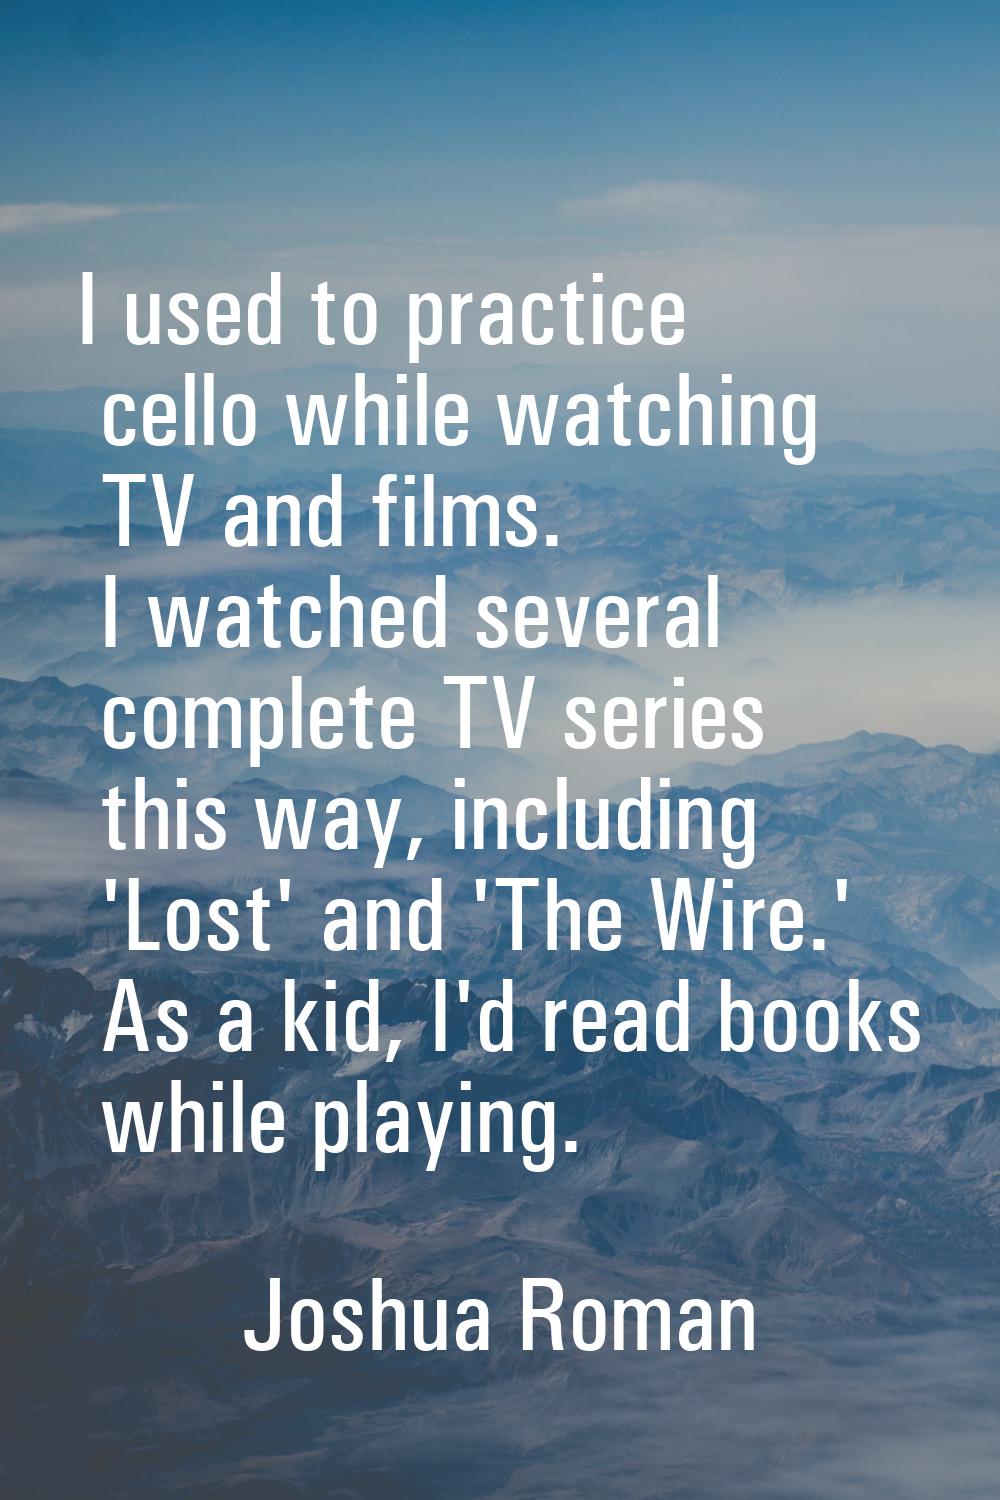 I used to practice cello while watching TV and films. I watched several complete TV series this way